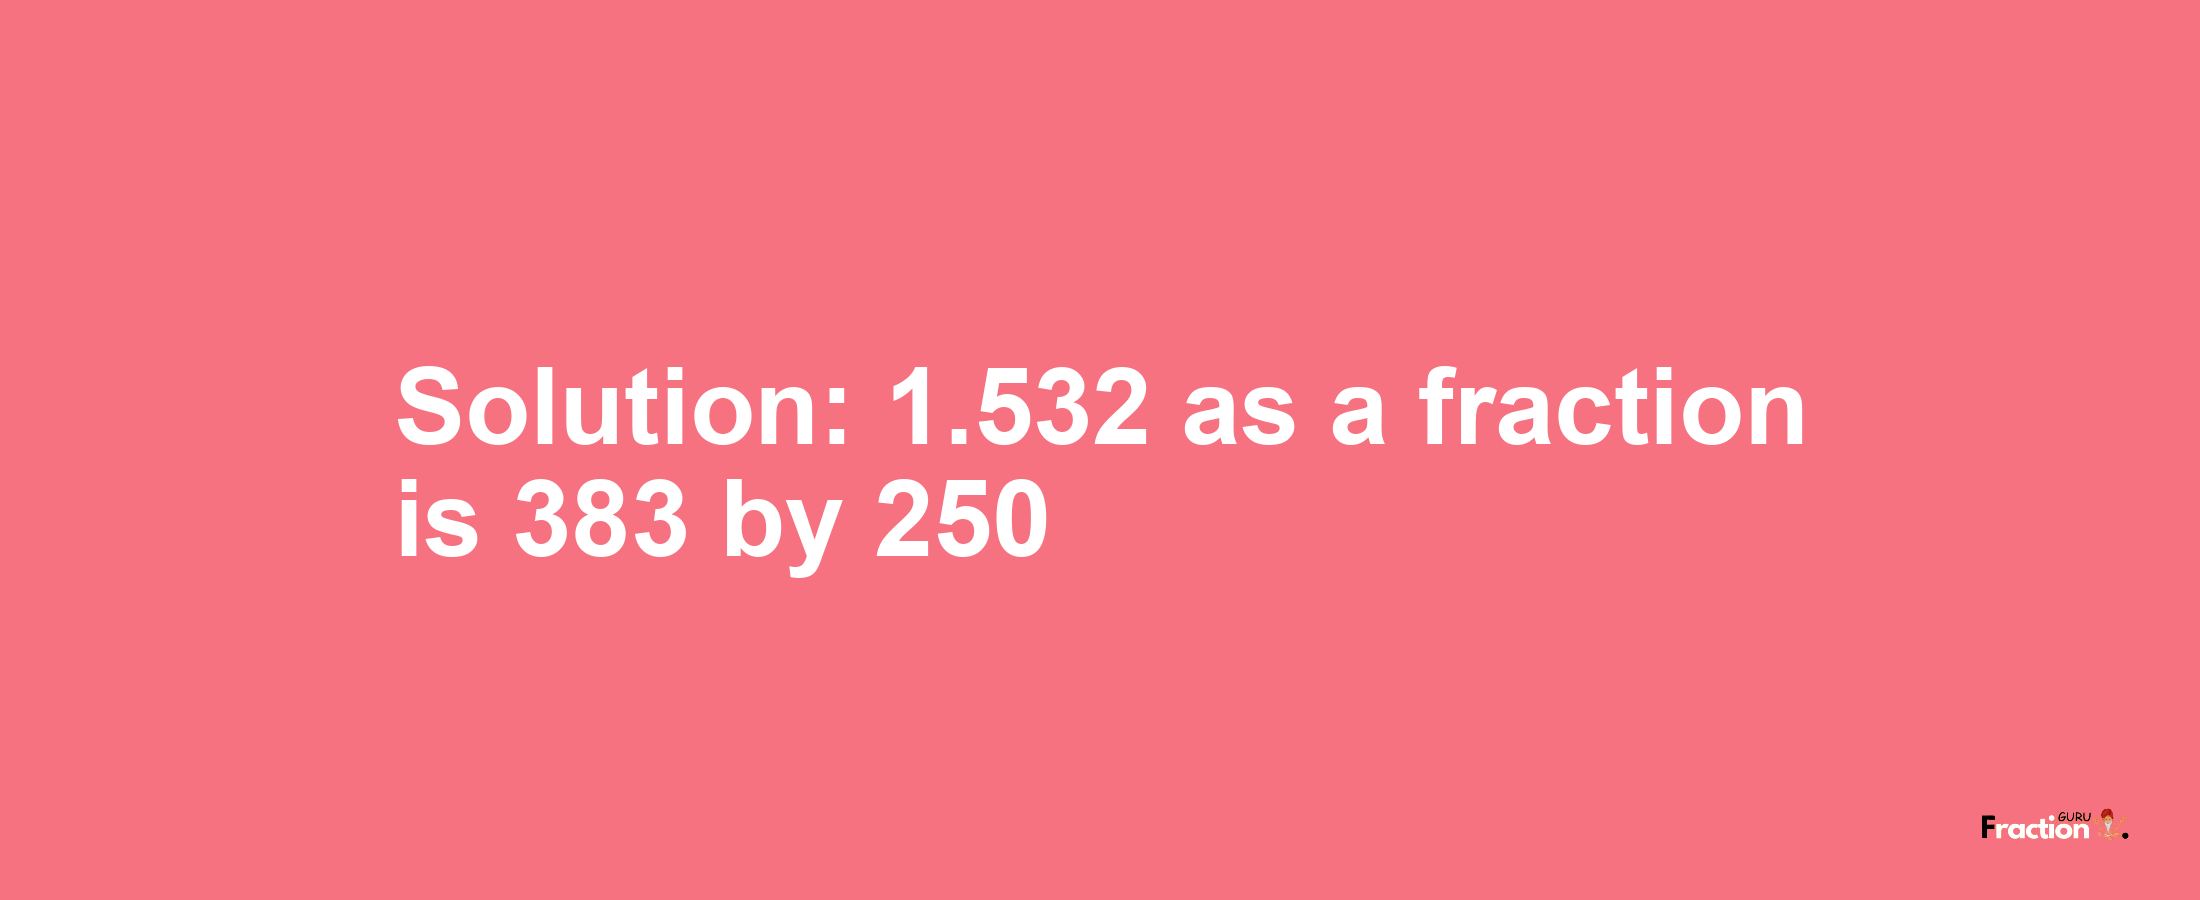 Solution:1.532 as a fraction is 383/250